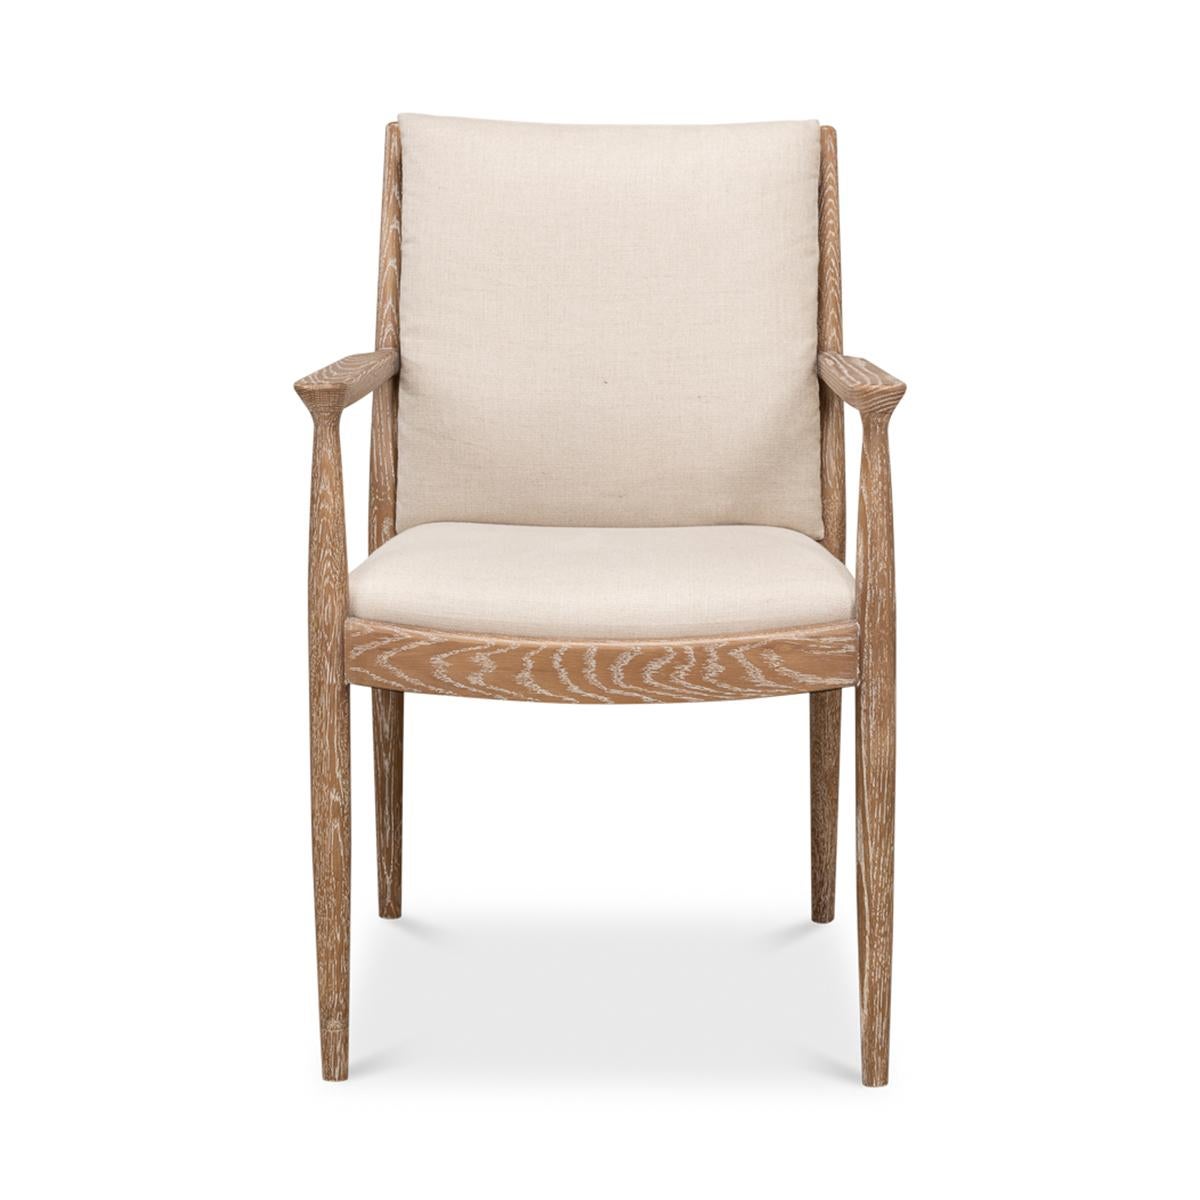 Mid Century Whitewash armchair with an oak whitewashed finish, beige fabric and a slatted backrest.

Dimensions: 22